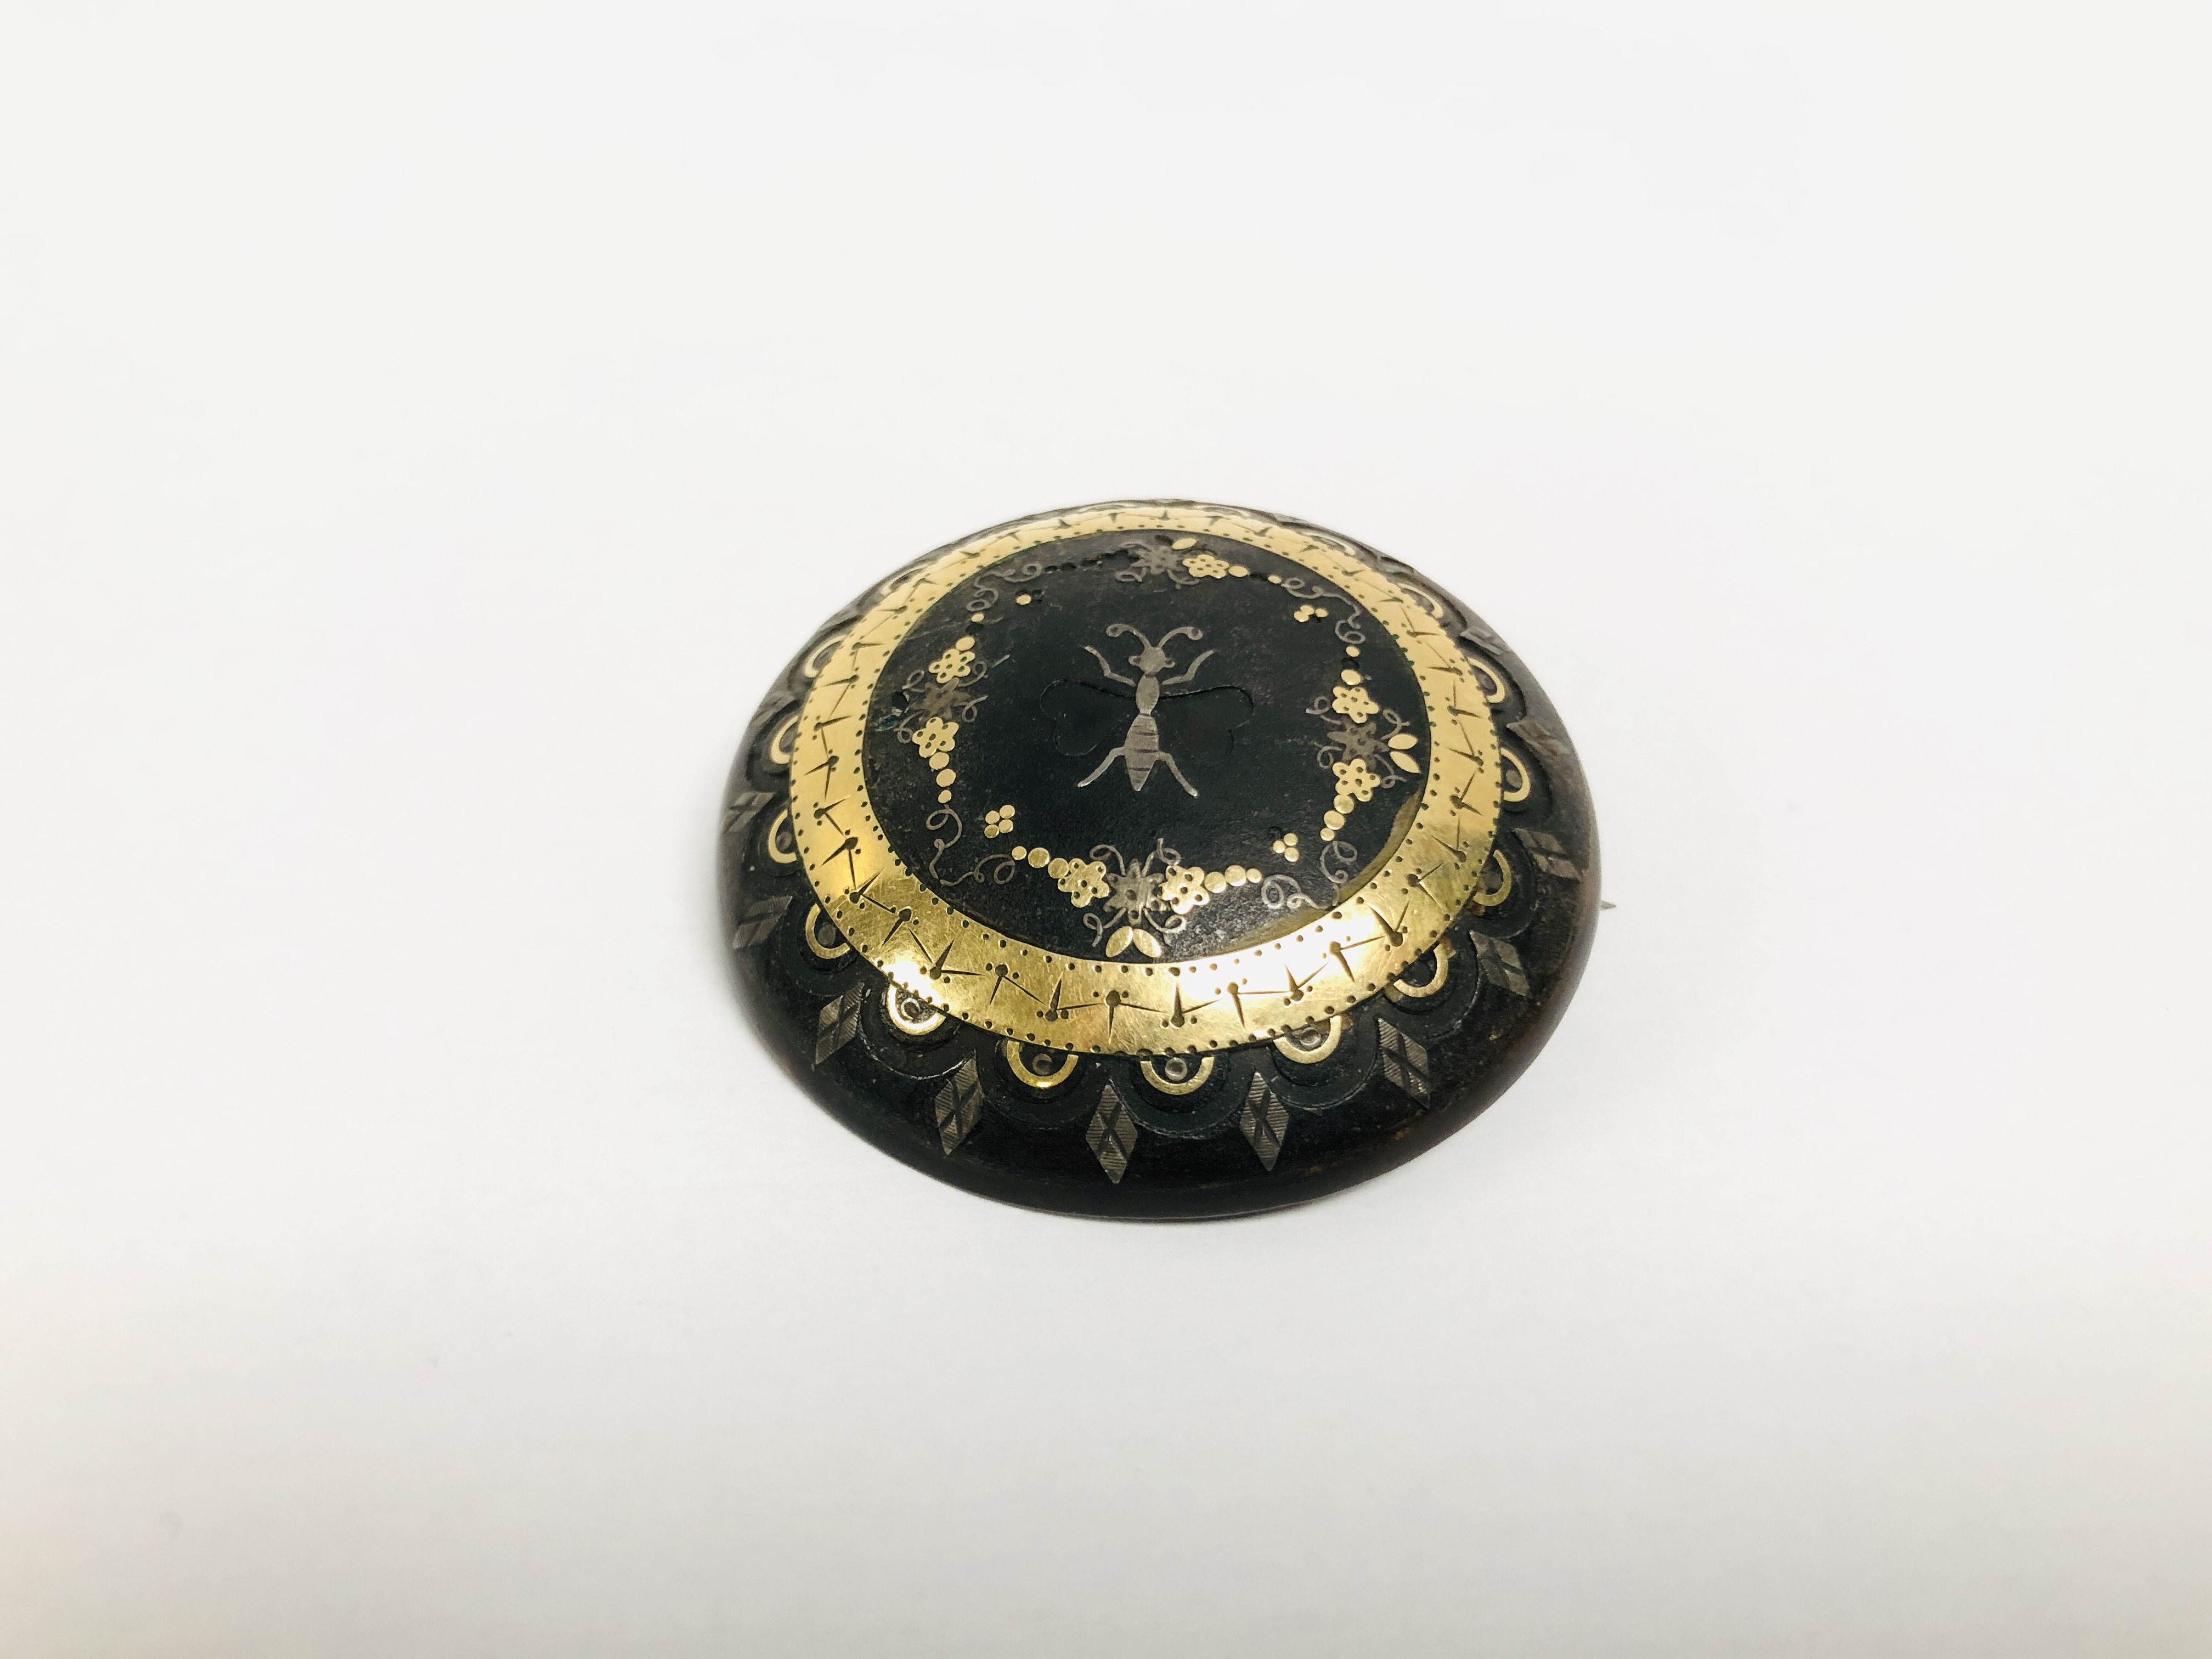 VICTORIAN TORTOISESHELL PIQUE BROOCH WITH YELLOW AND WHITE GOLD DESIGN OF SWAGS AND CENTRAL